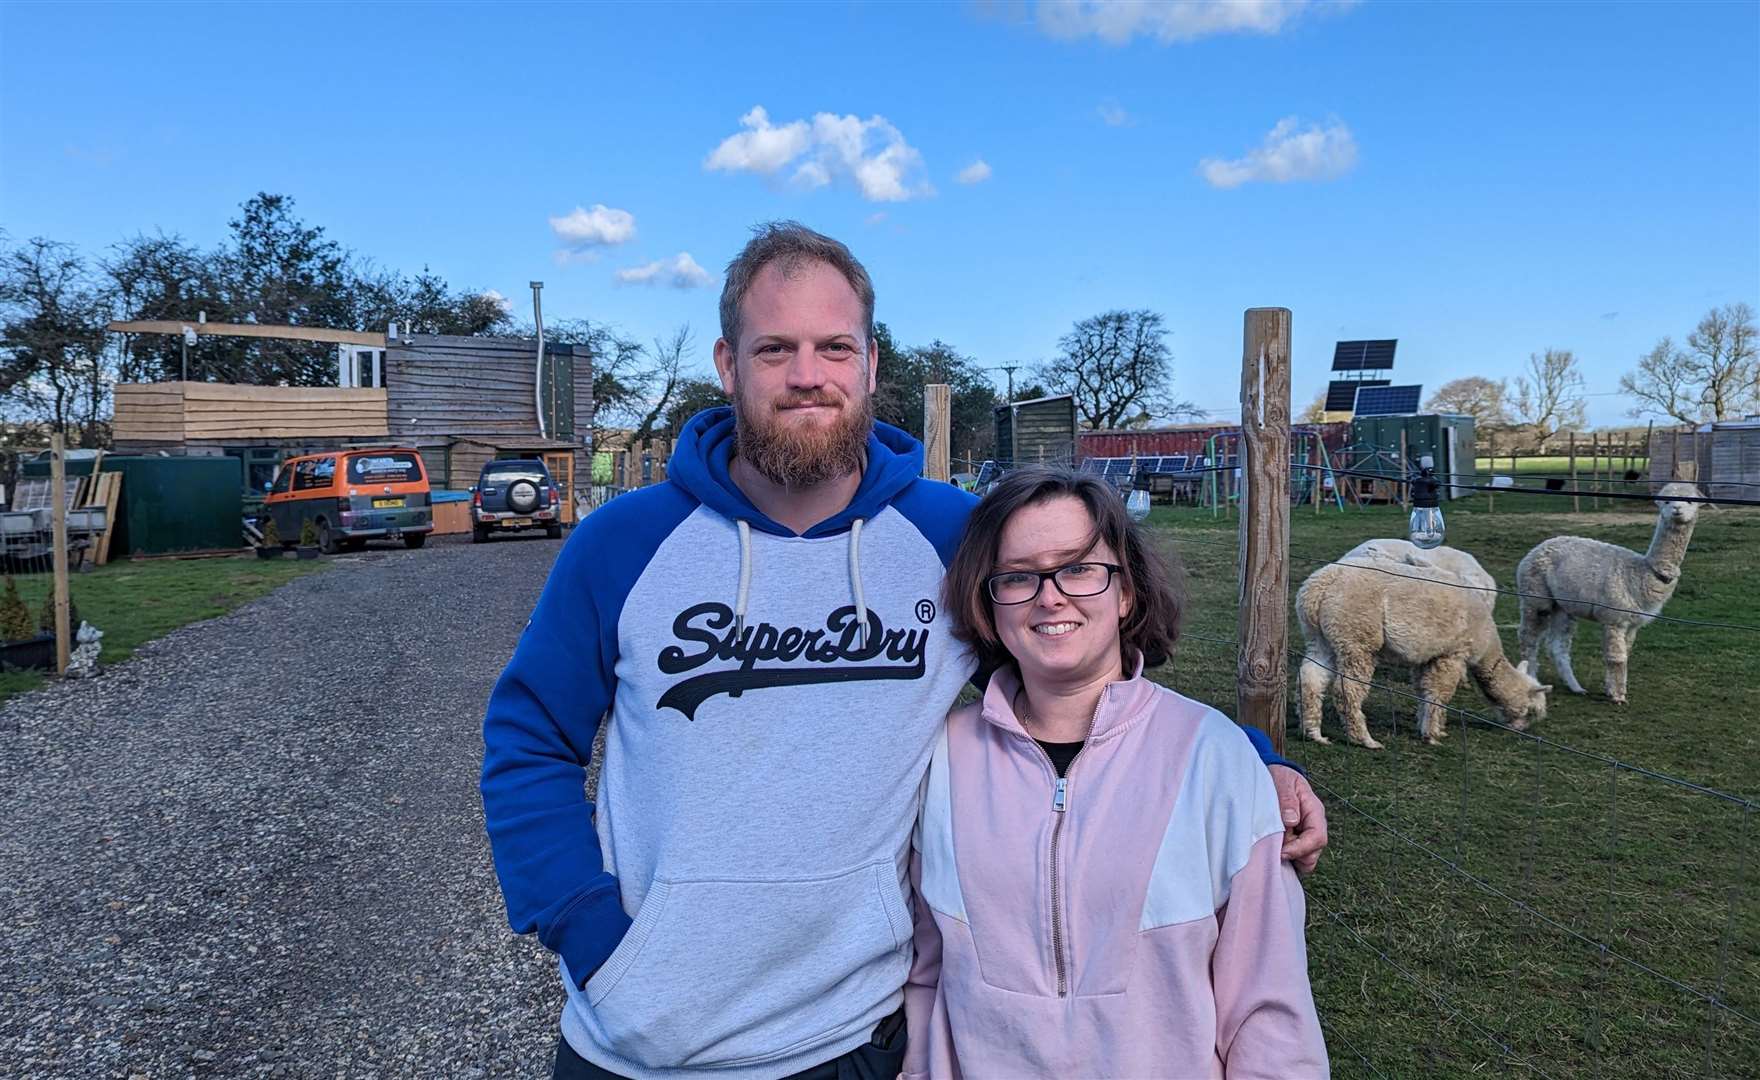 Dan and Stacey Bond are living the off-grid lifestyle near Folkestone but are in a planning battle with the council